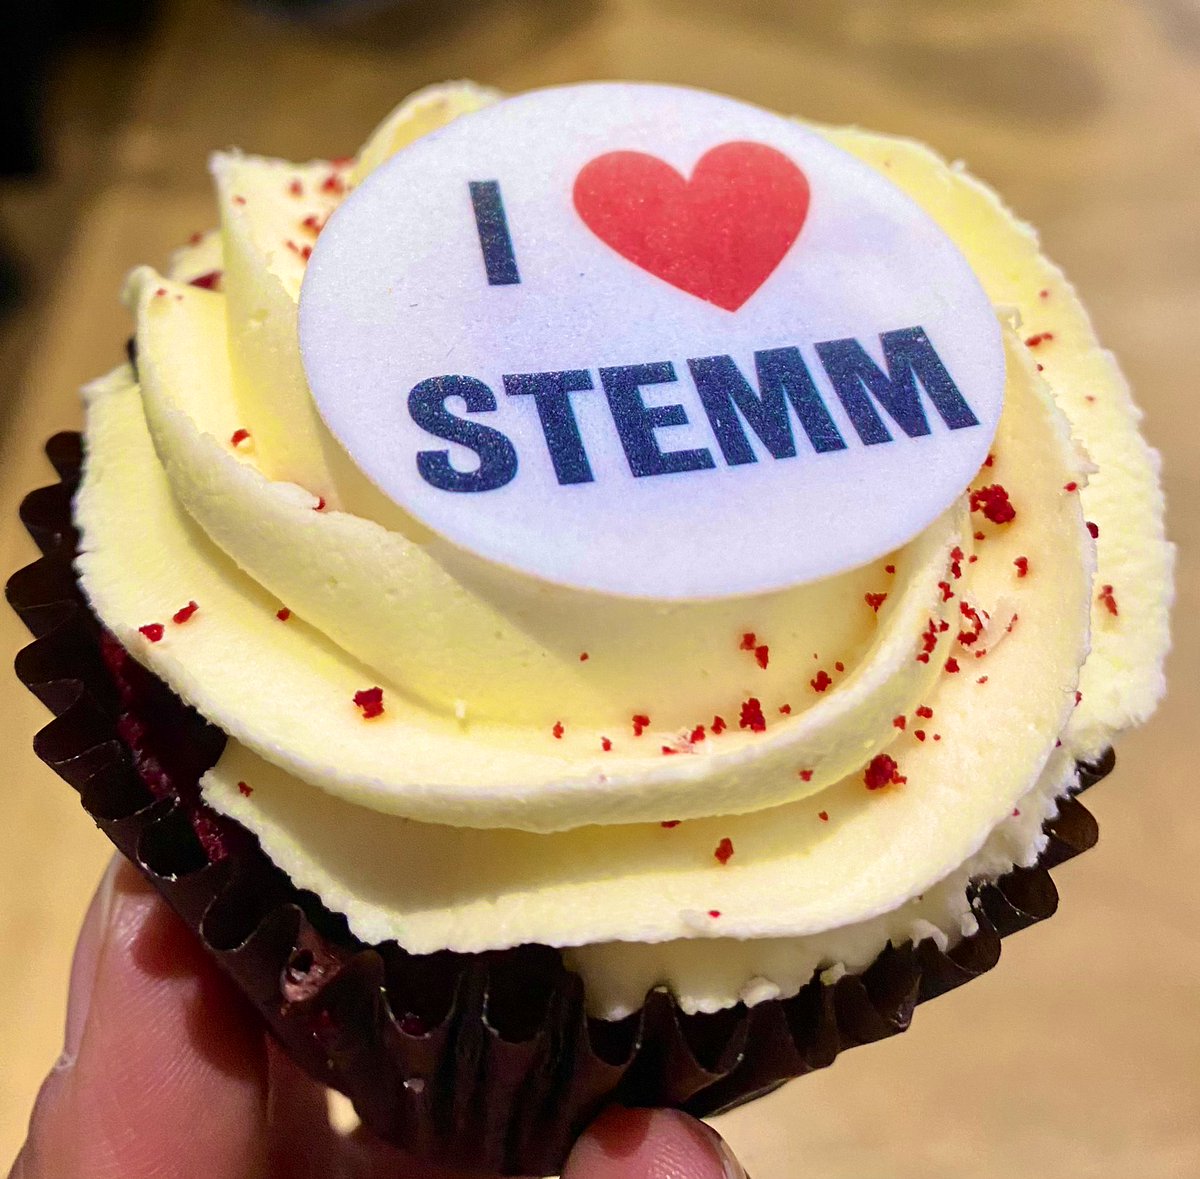 👩🏻‍🔬 Fantastic panel discussion by #KCLWomenInSTEMM, covering topics from #Mentorship to #ResearchCulture to #ImposterSyndrome

👏🏼 Thank you to the speakers for sharing their experiences and insights 

🧁 Also featuring some very cute #STEMM cupcakes!

@kingsmedicine @KingsNMES